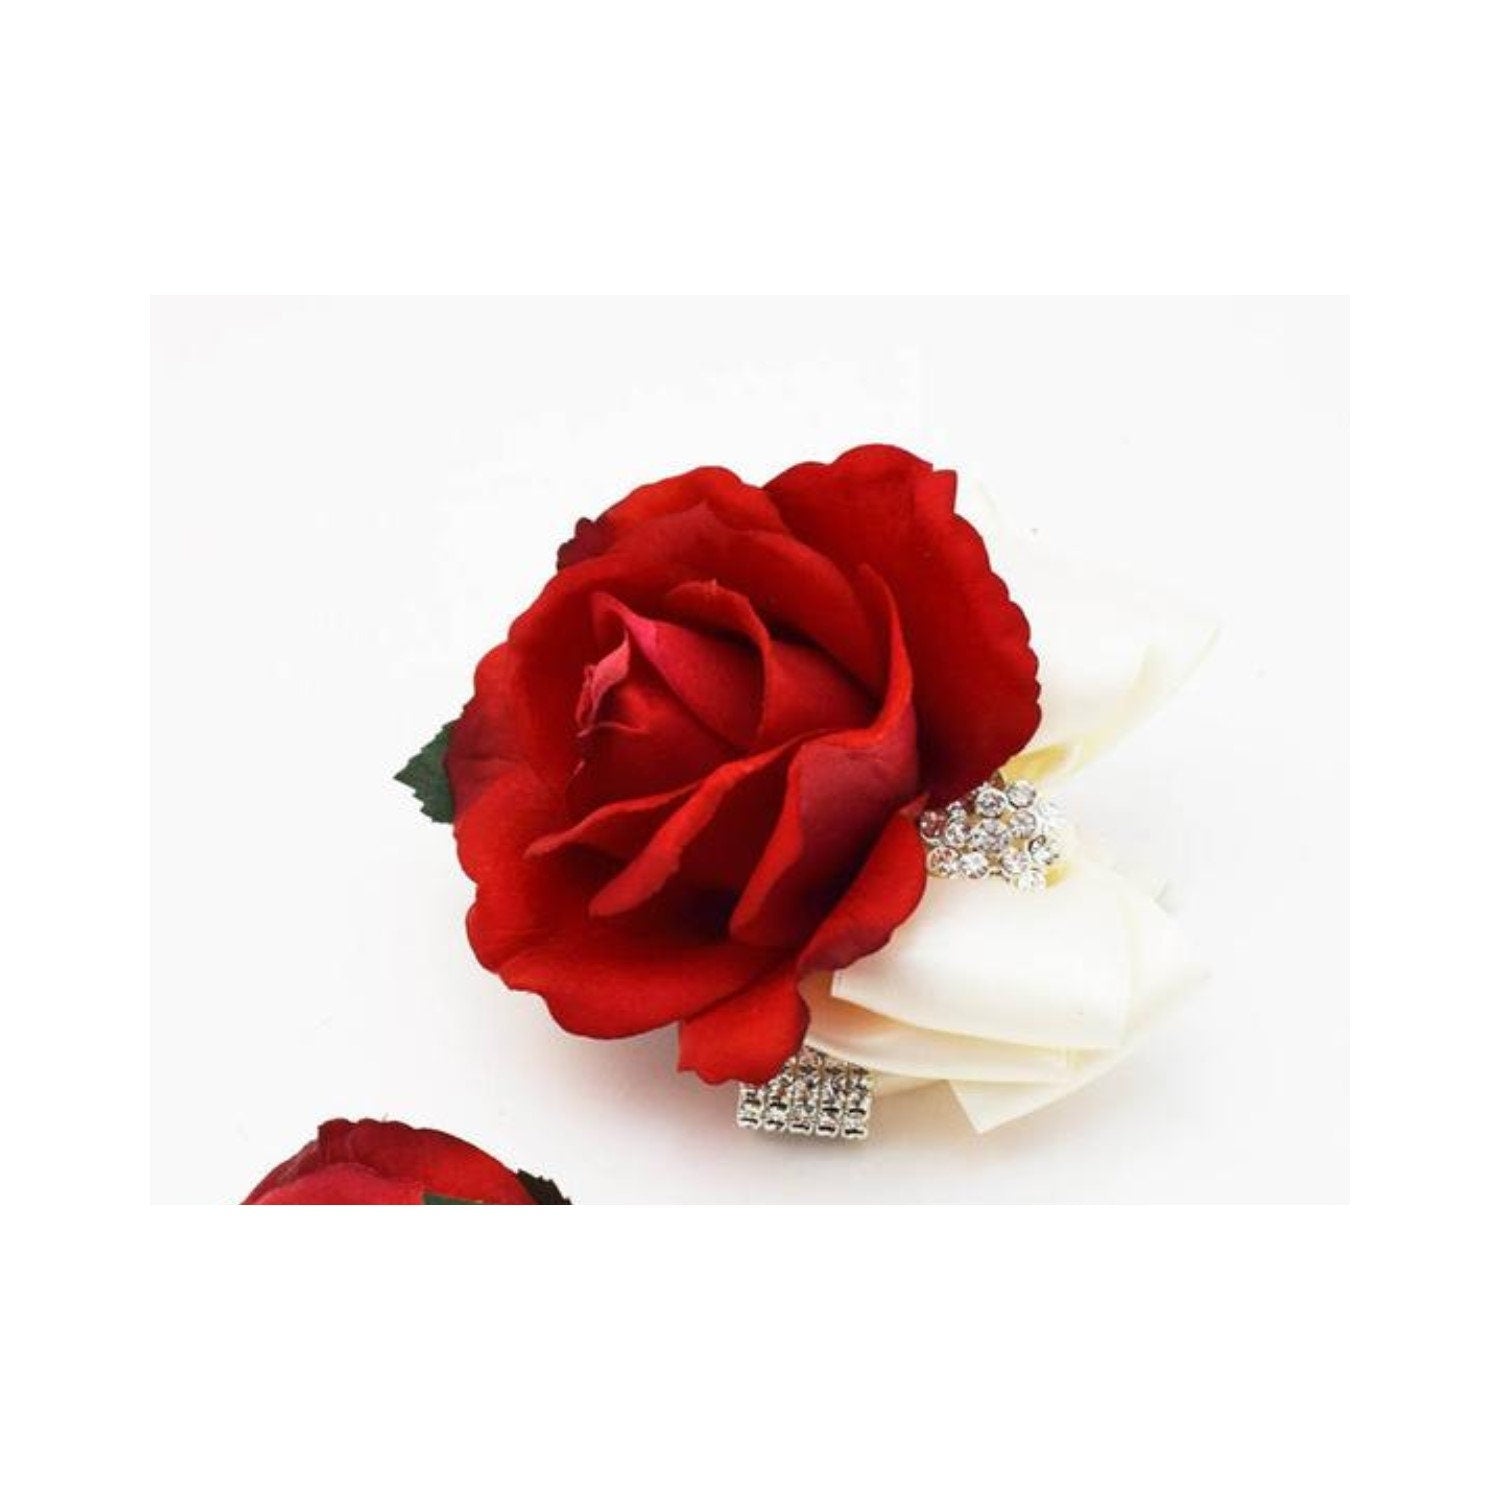 Red Roses Calla Lilies & Crystals Bridal or Bridesmaid Bouquet - add a Groom or Groomsman Boutonniere or Corsage Flower Crown and More!